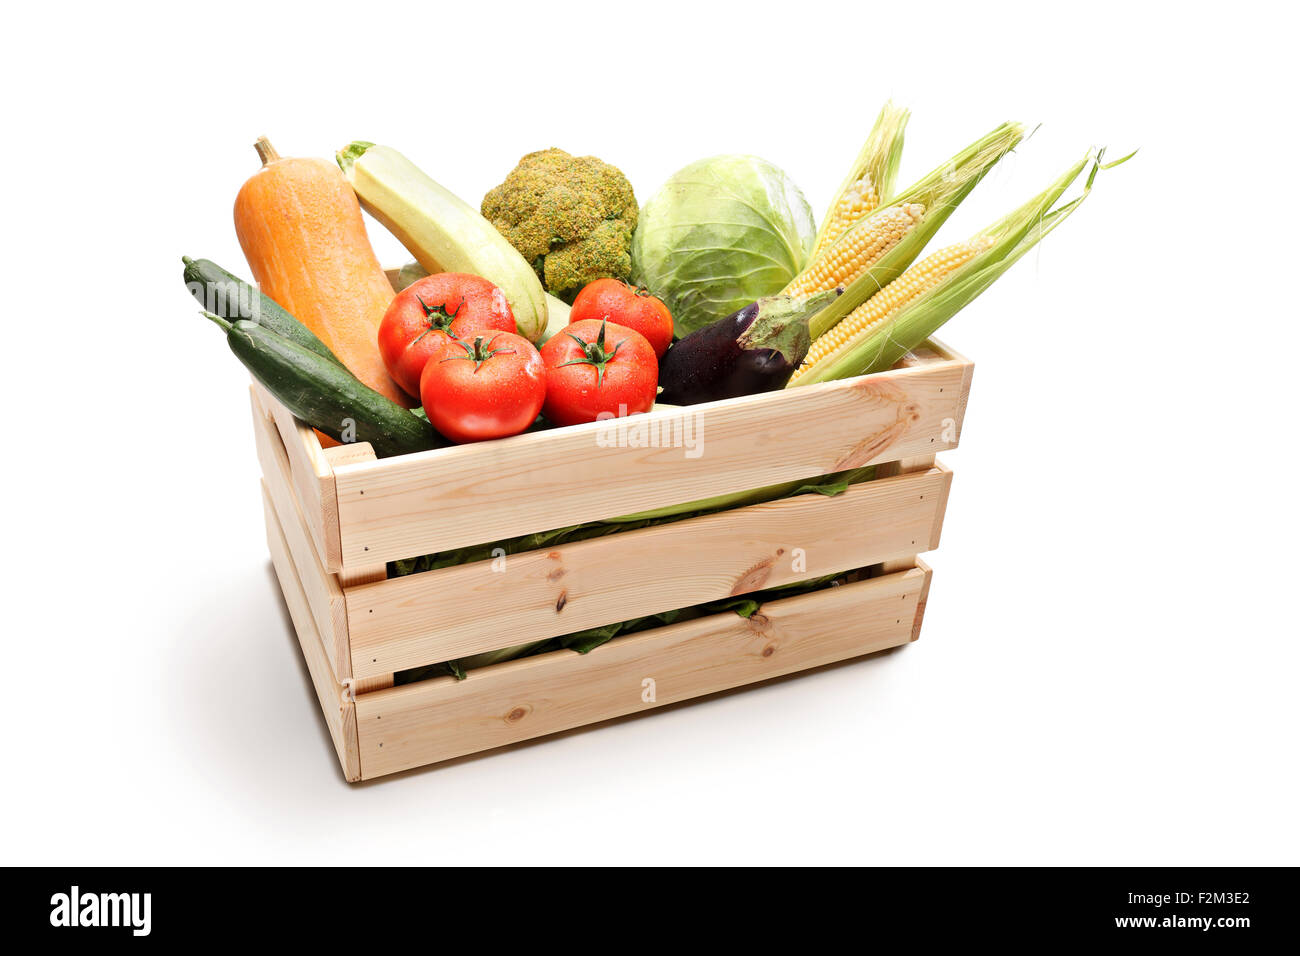 Studio shot of a wooden crate full of different types of fresh vegetables isolated on white background Stock Photo